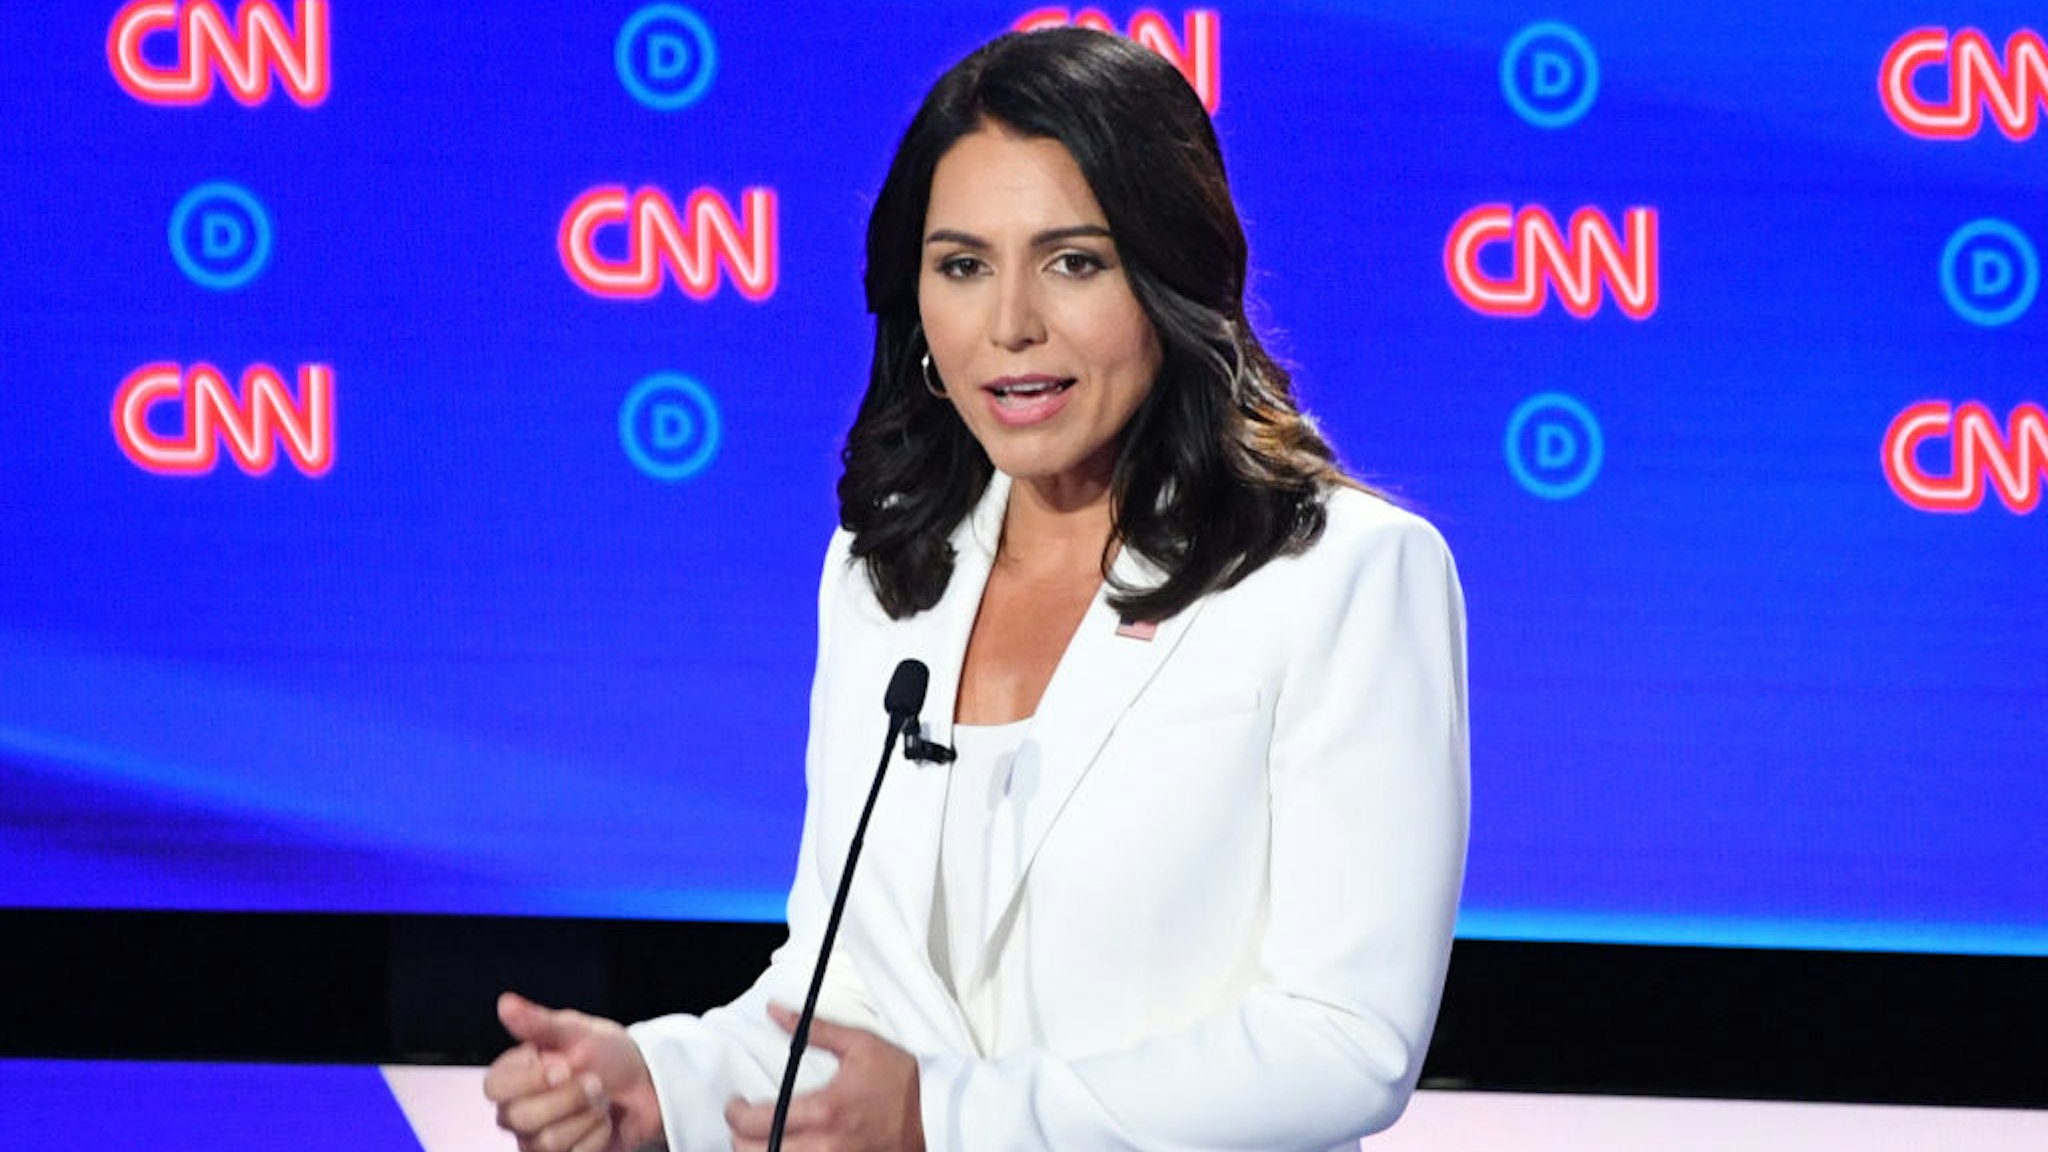 Democratic presidential hopeful US Representative for Hawaii's 2nd congressional district Tulsi Gabbard speaks during the second round of the second Democratic primary debate of the 2020 presidential campaign season hosted by CNN at the Fox Theatre in Detroit, Michigan on July 31, 2019.